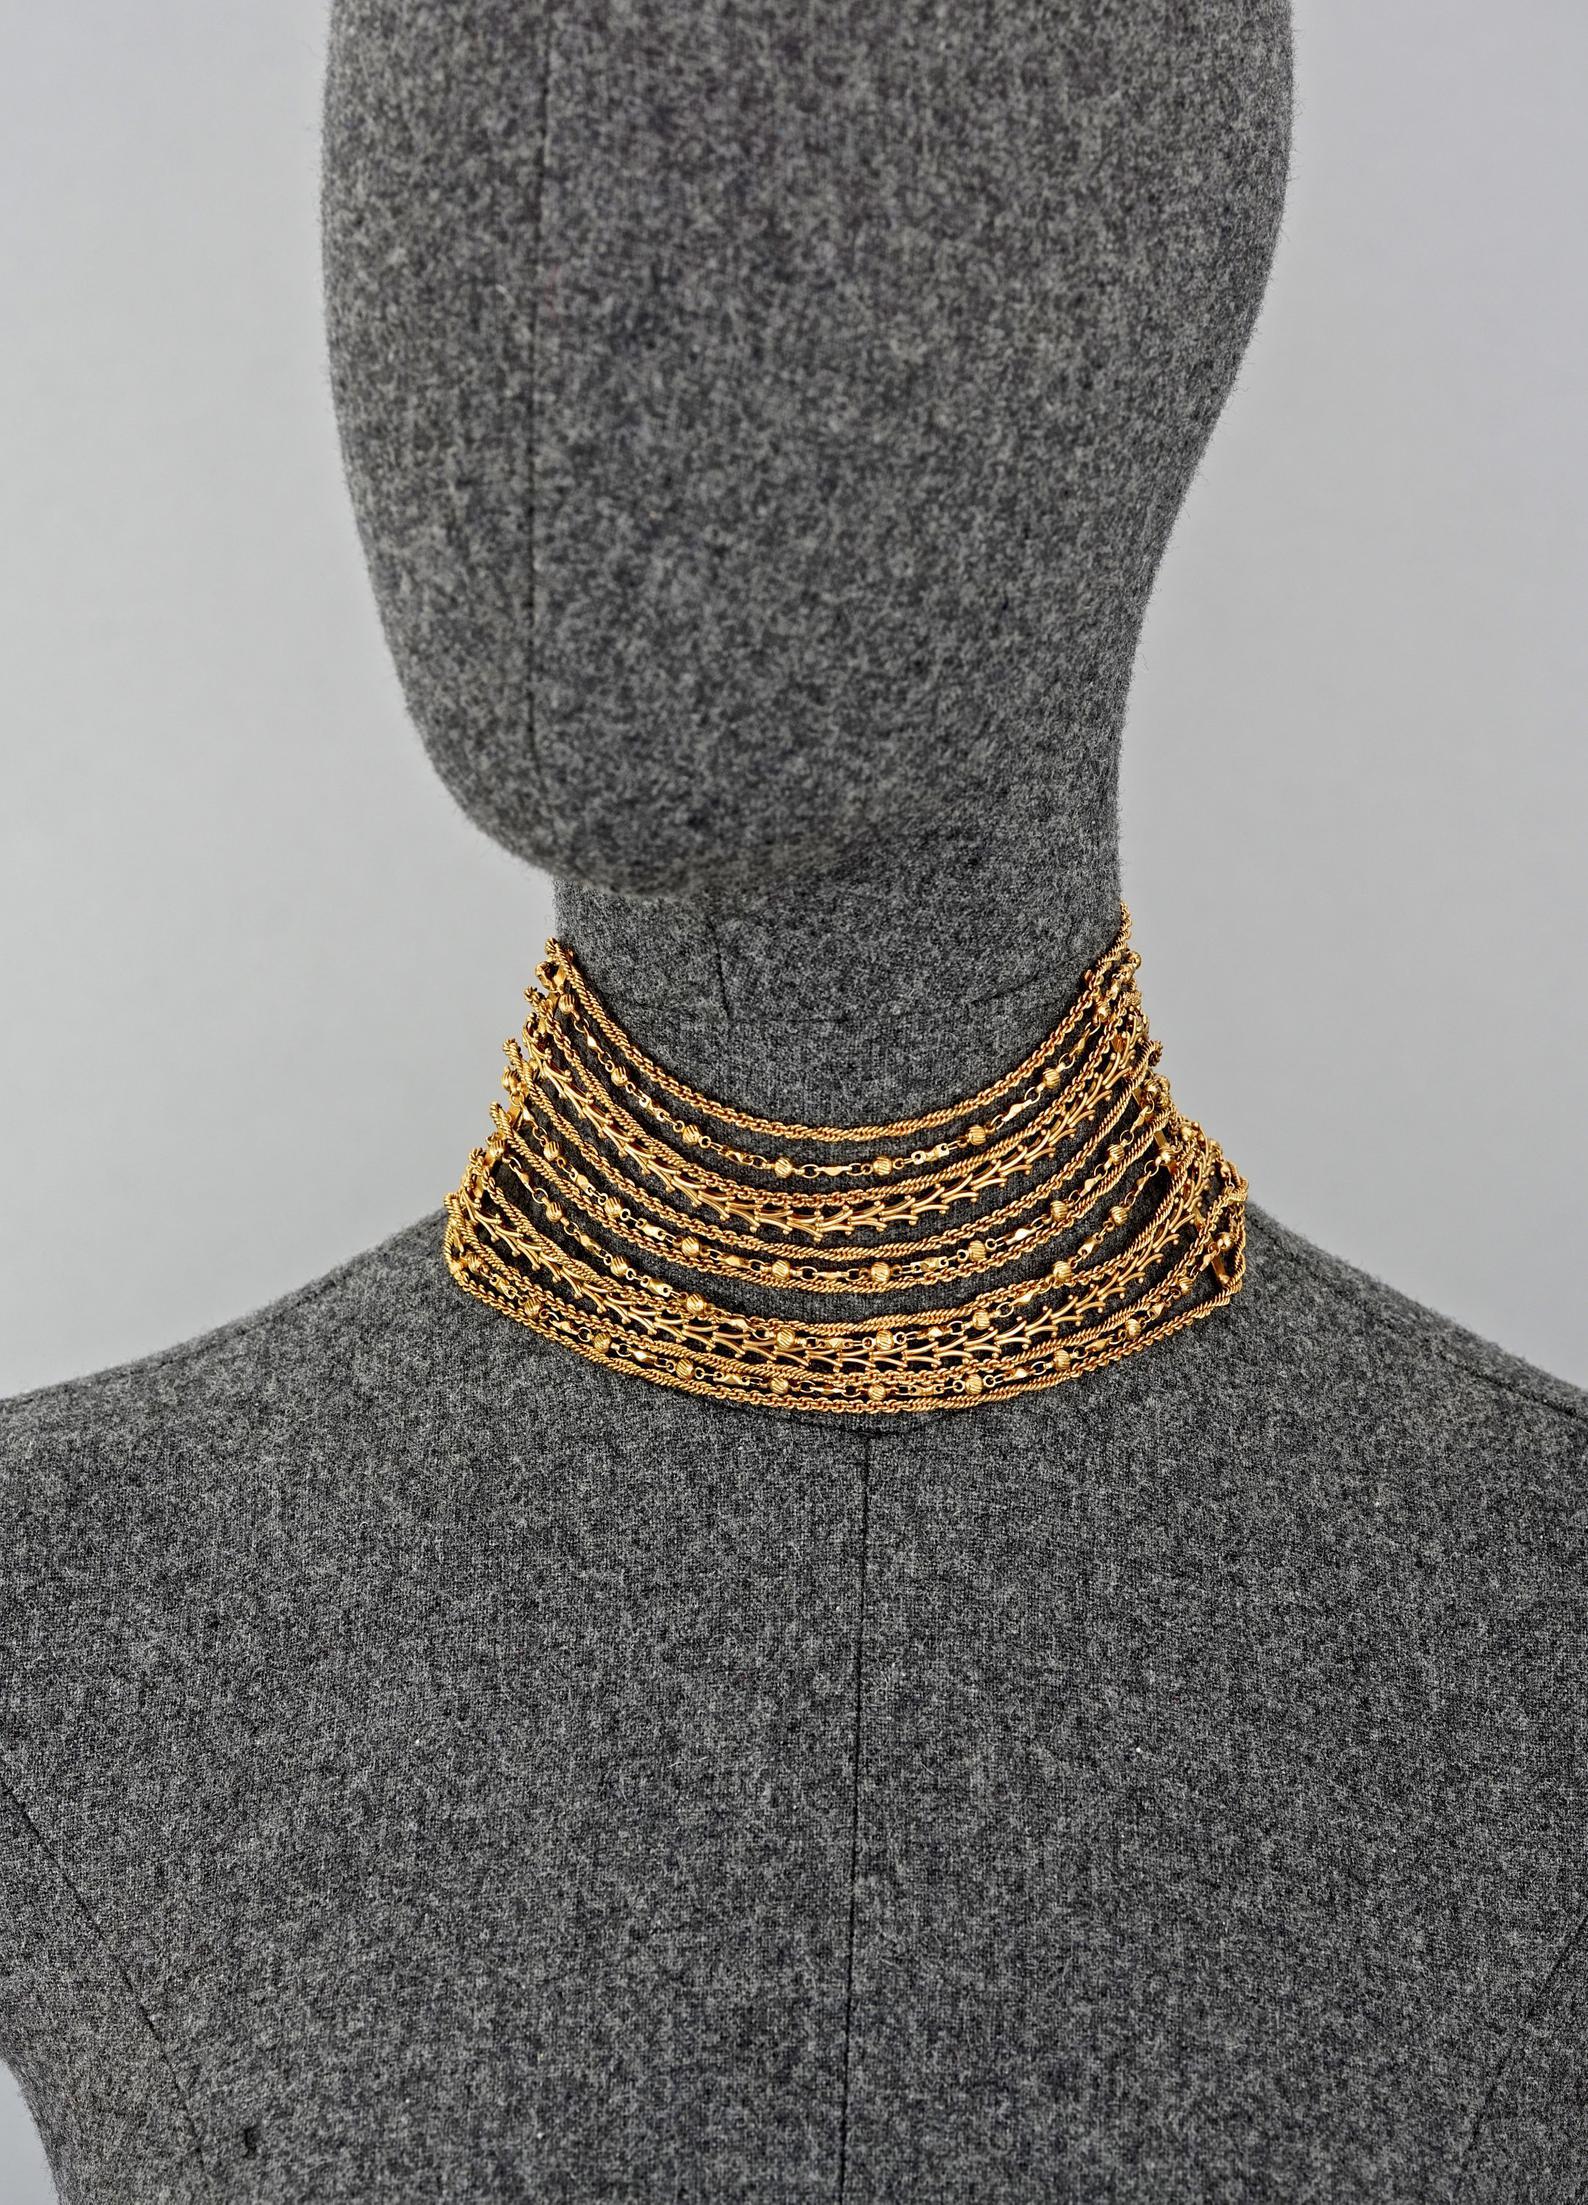 Vintage CHRISTIAN LACROIX Masai Multi Strand Chain Choker Necklace

Measurements:
Height: 2.75 inches (7cm)
Wearable Length: 12.99 inches (33 cm) to 13.38 inches (34 cm)

Features:
- 100% Authentic CHRISTIAN LACROIX.
- 13 strands of chain in